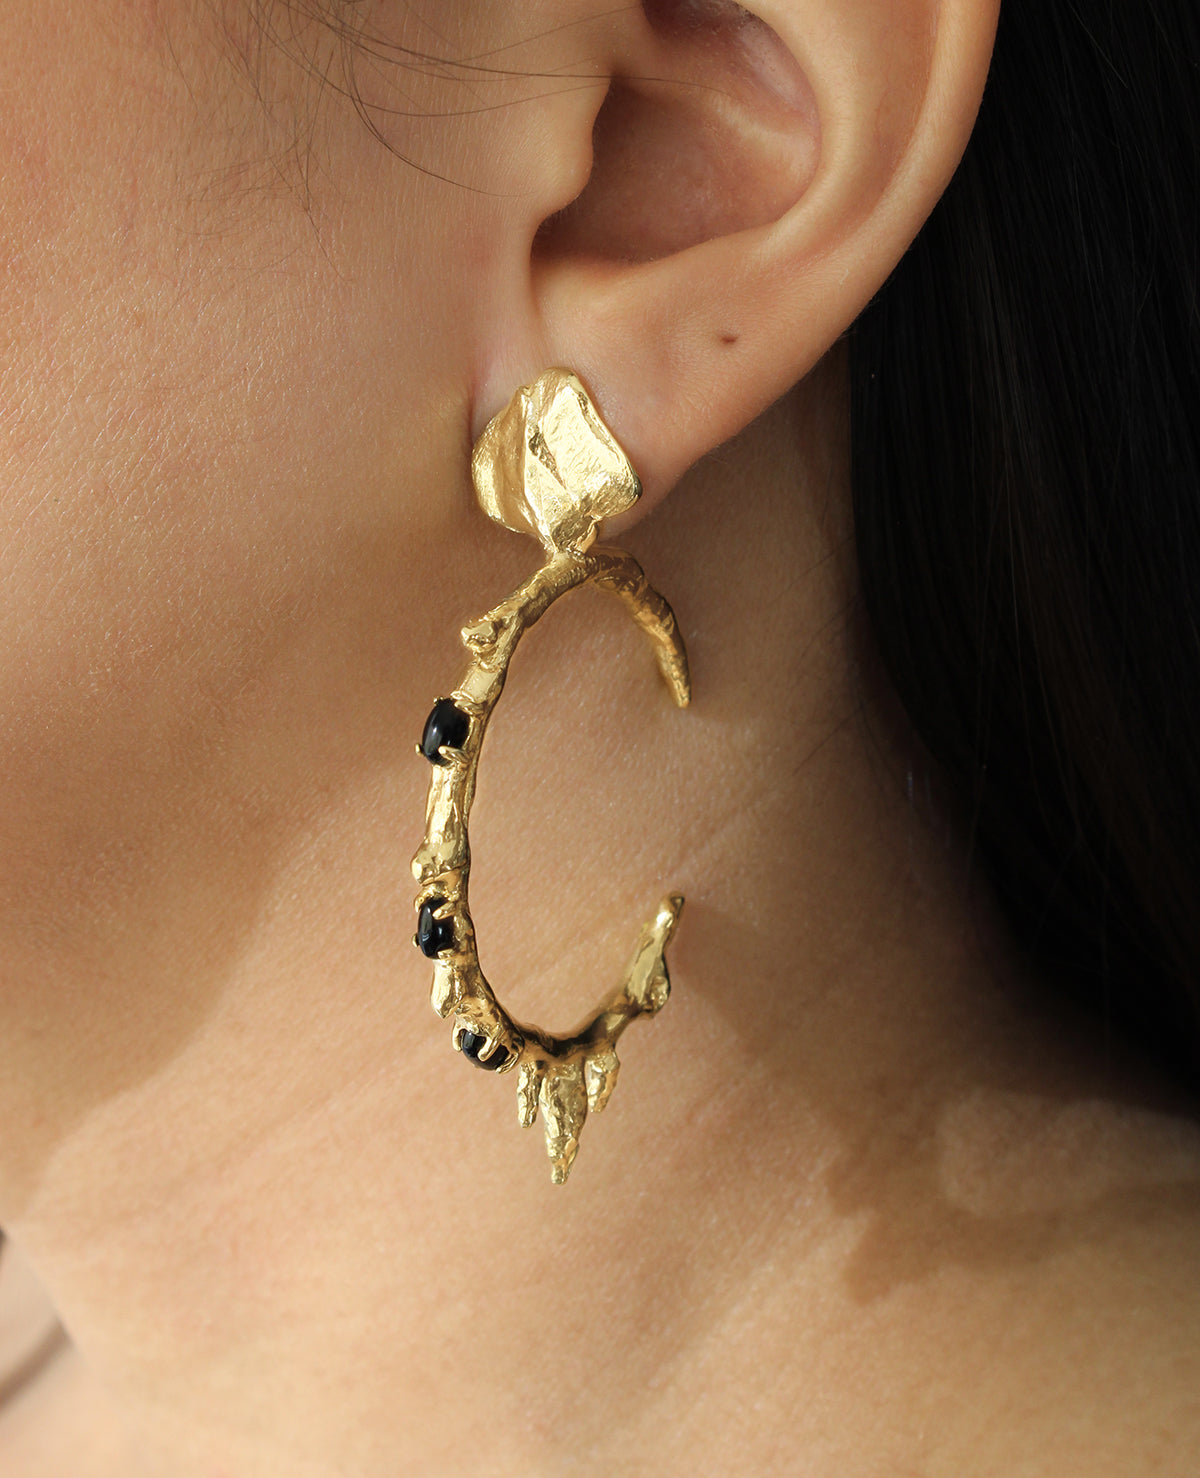 DON'T CRY // golden hoops - ORA-C jewelry - handmade jewelry by Montreal based independent designer Caroline Pham